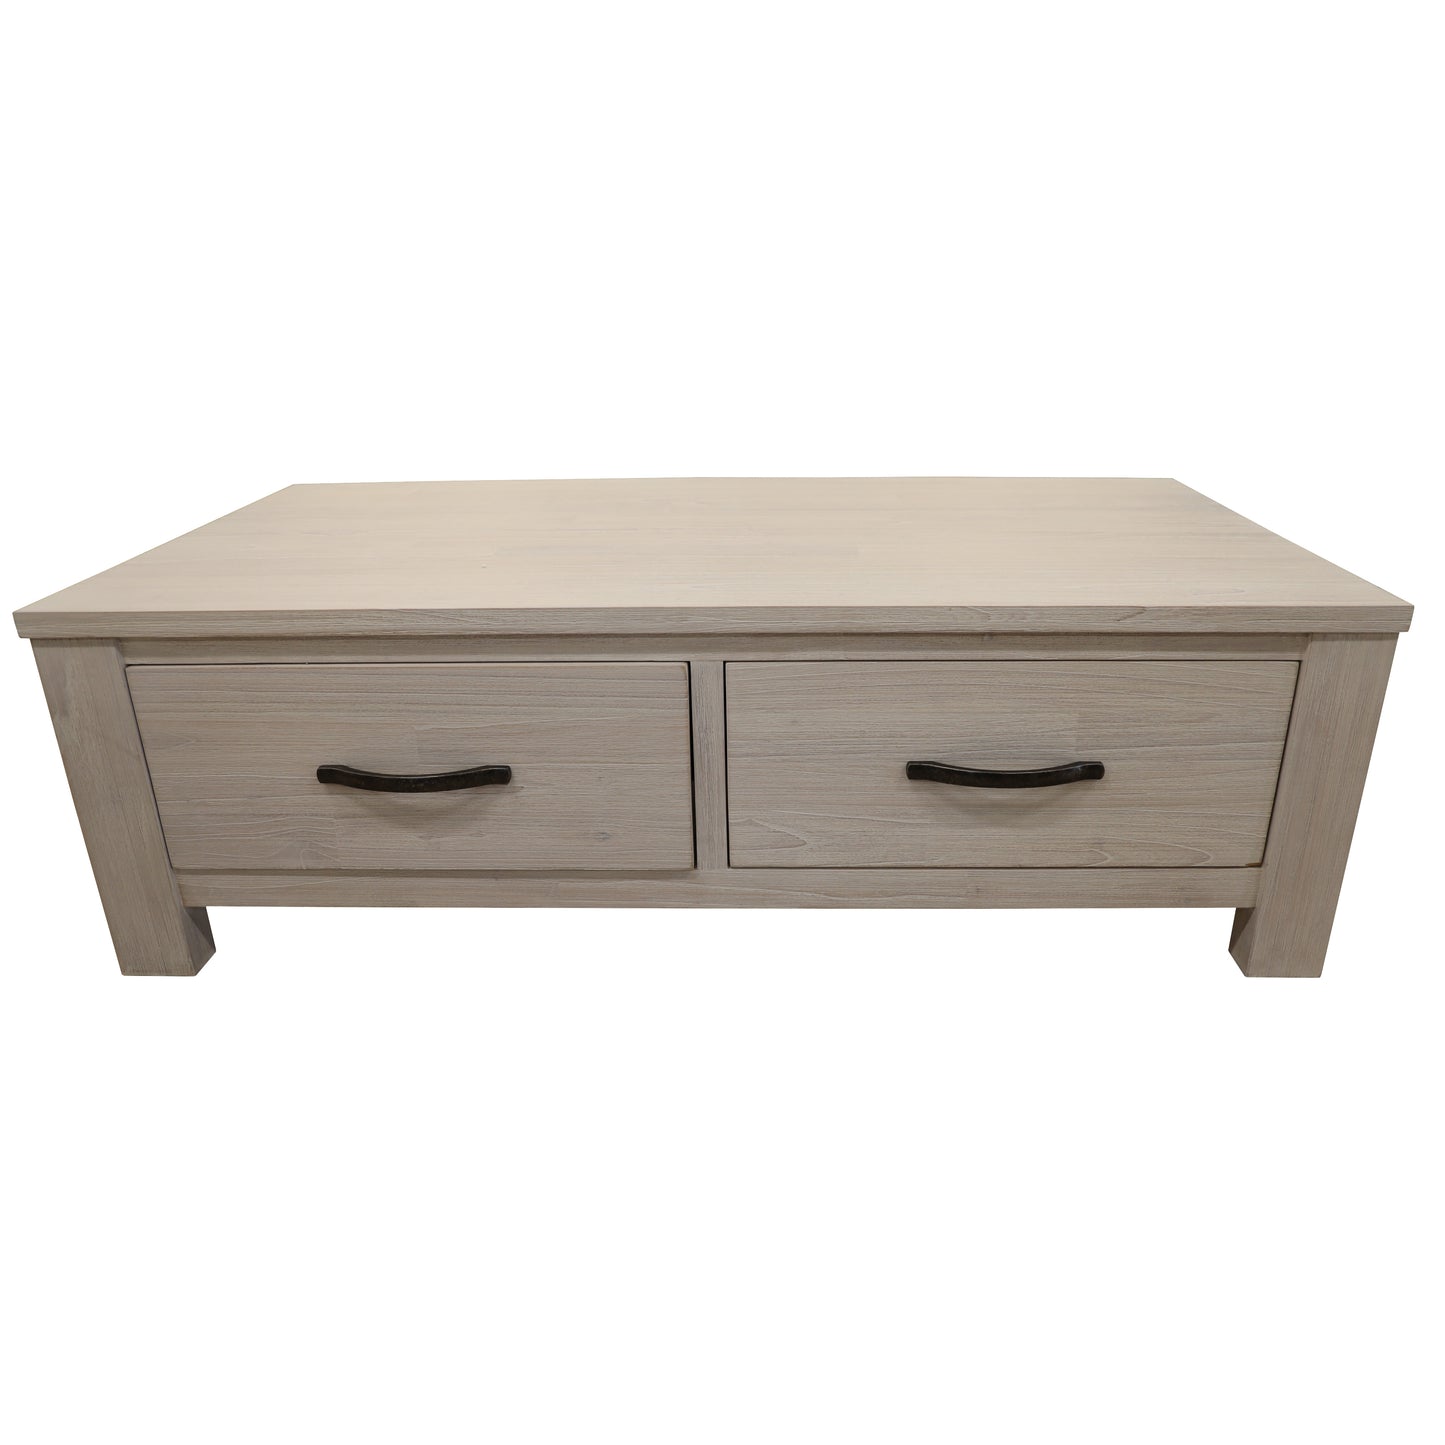 Foxglove Coffee Table Solid Mt Ash Timber Wood  127cm - White